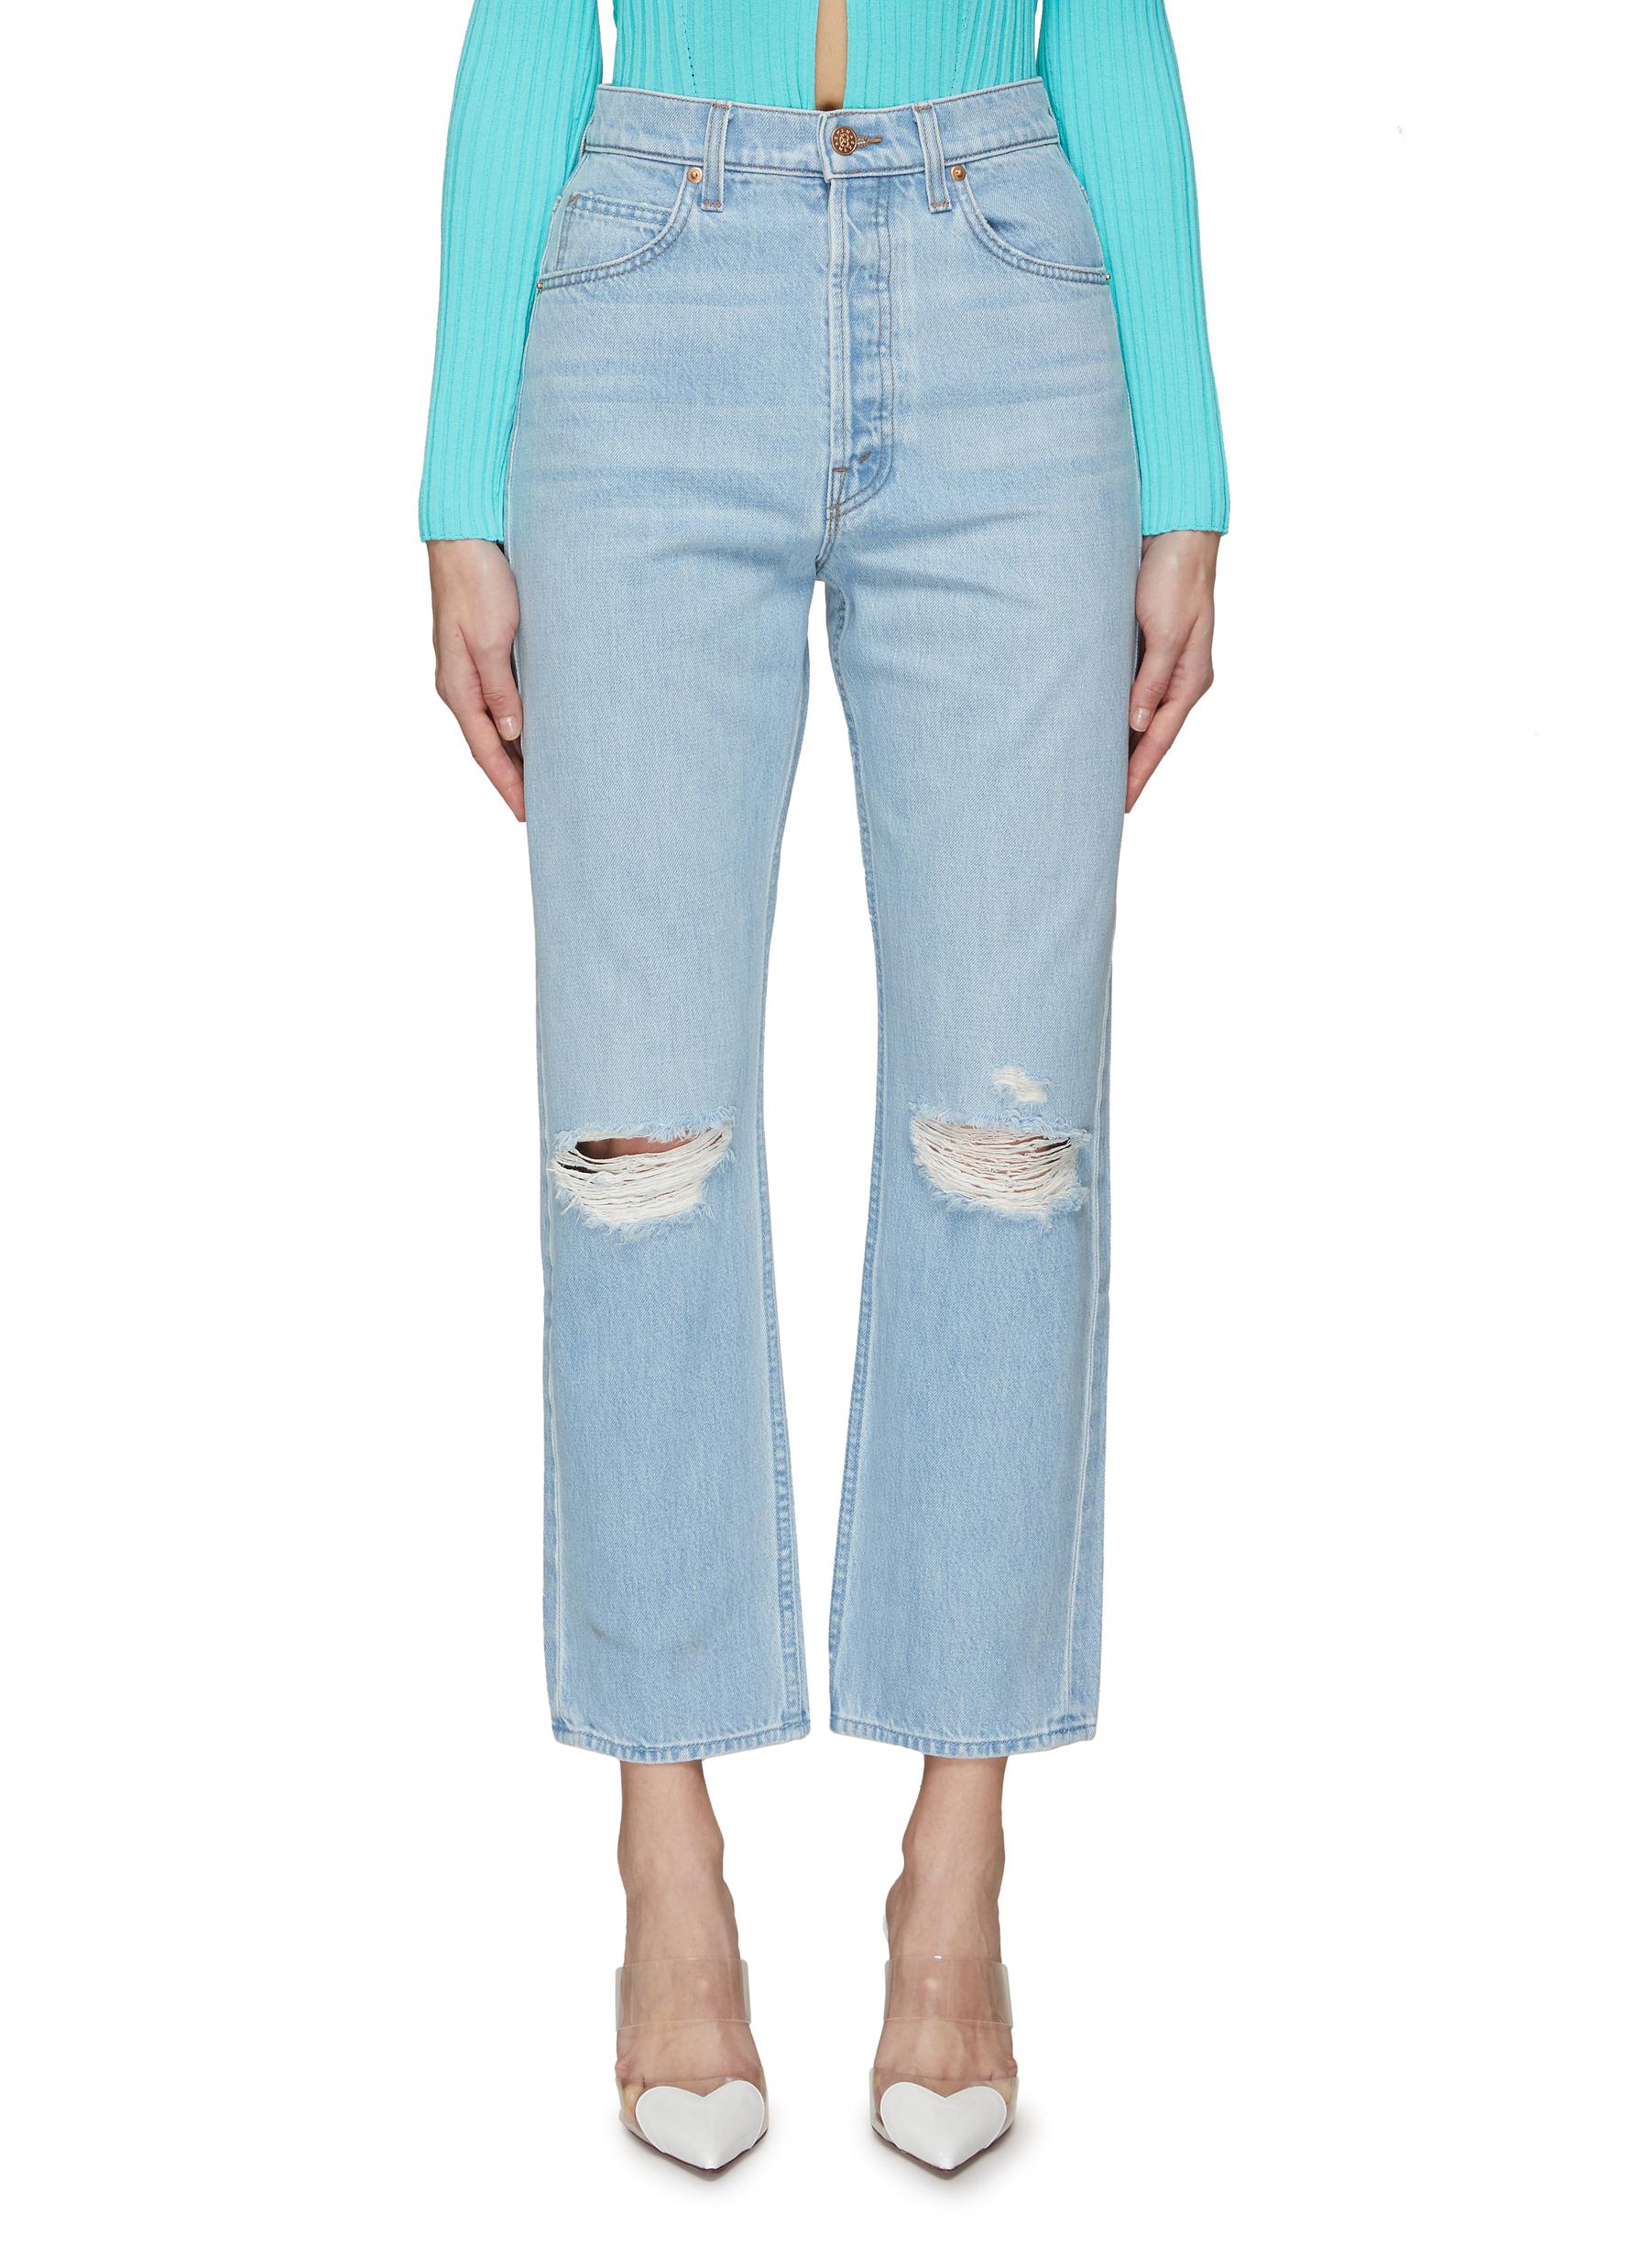 MOTHER ‘The Tippy Top' Sweet Tooth Light Washed Ankle Jeans